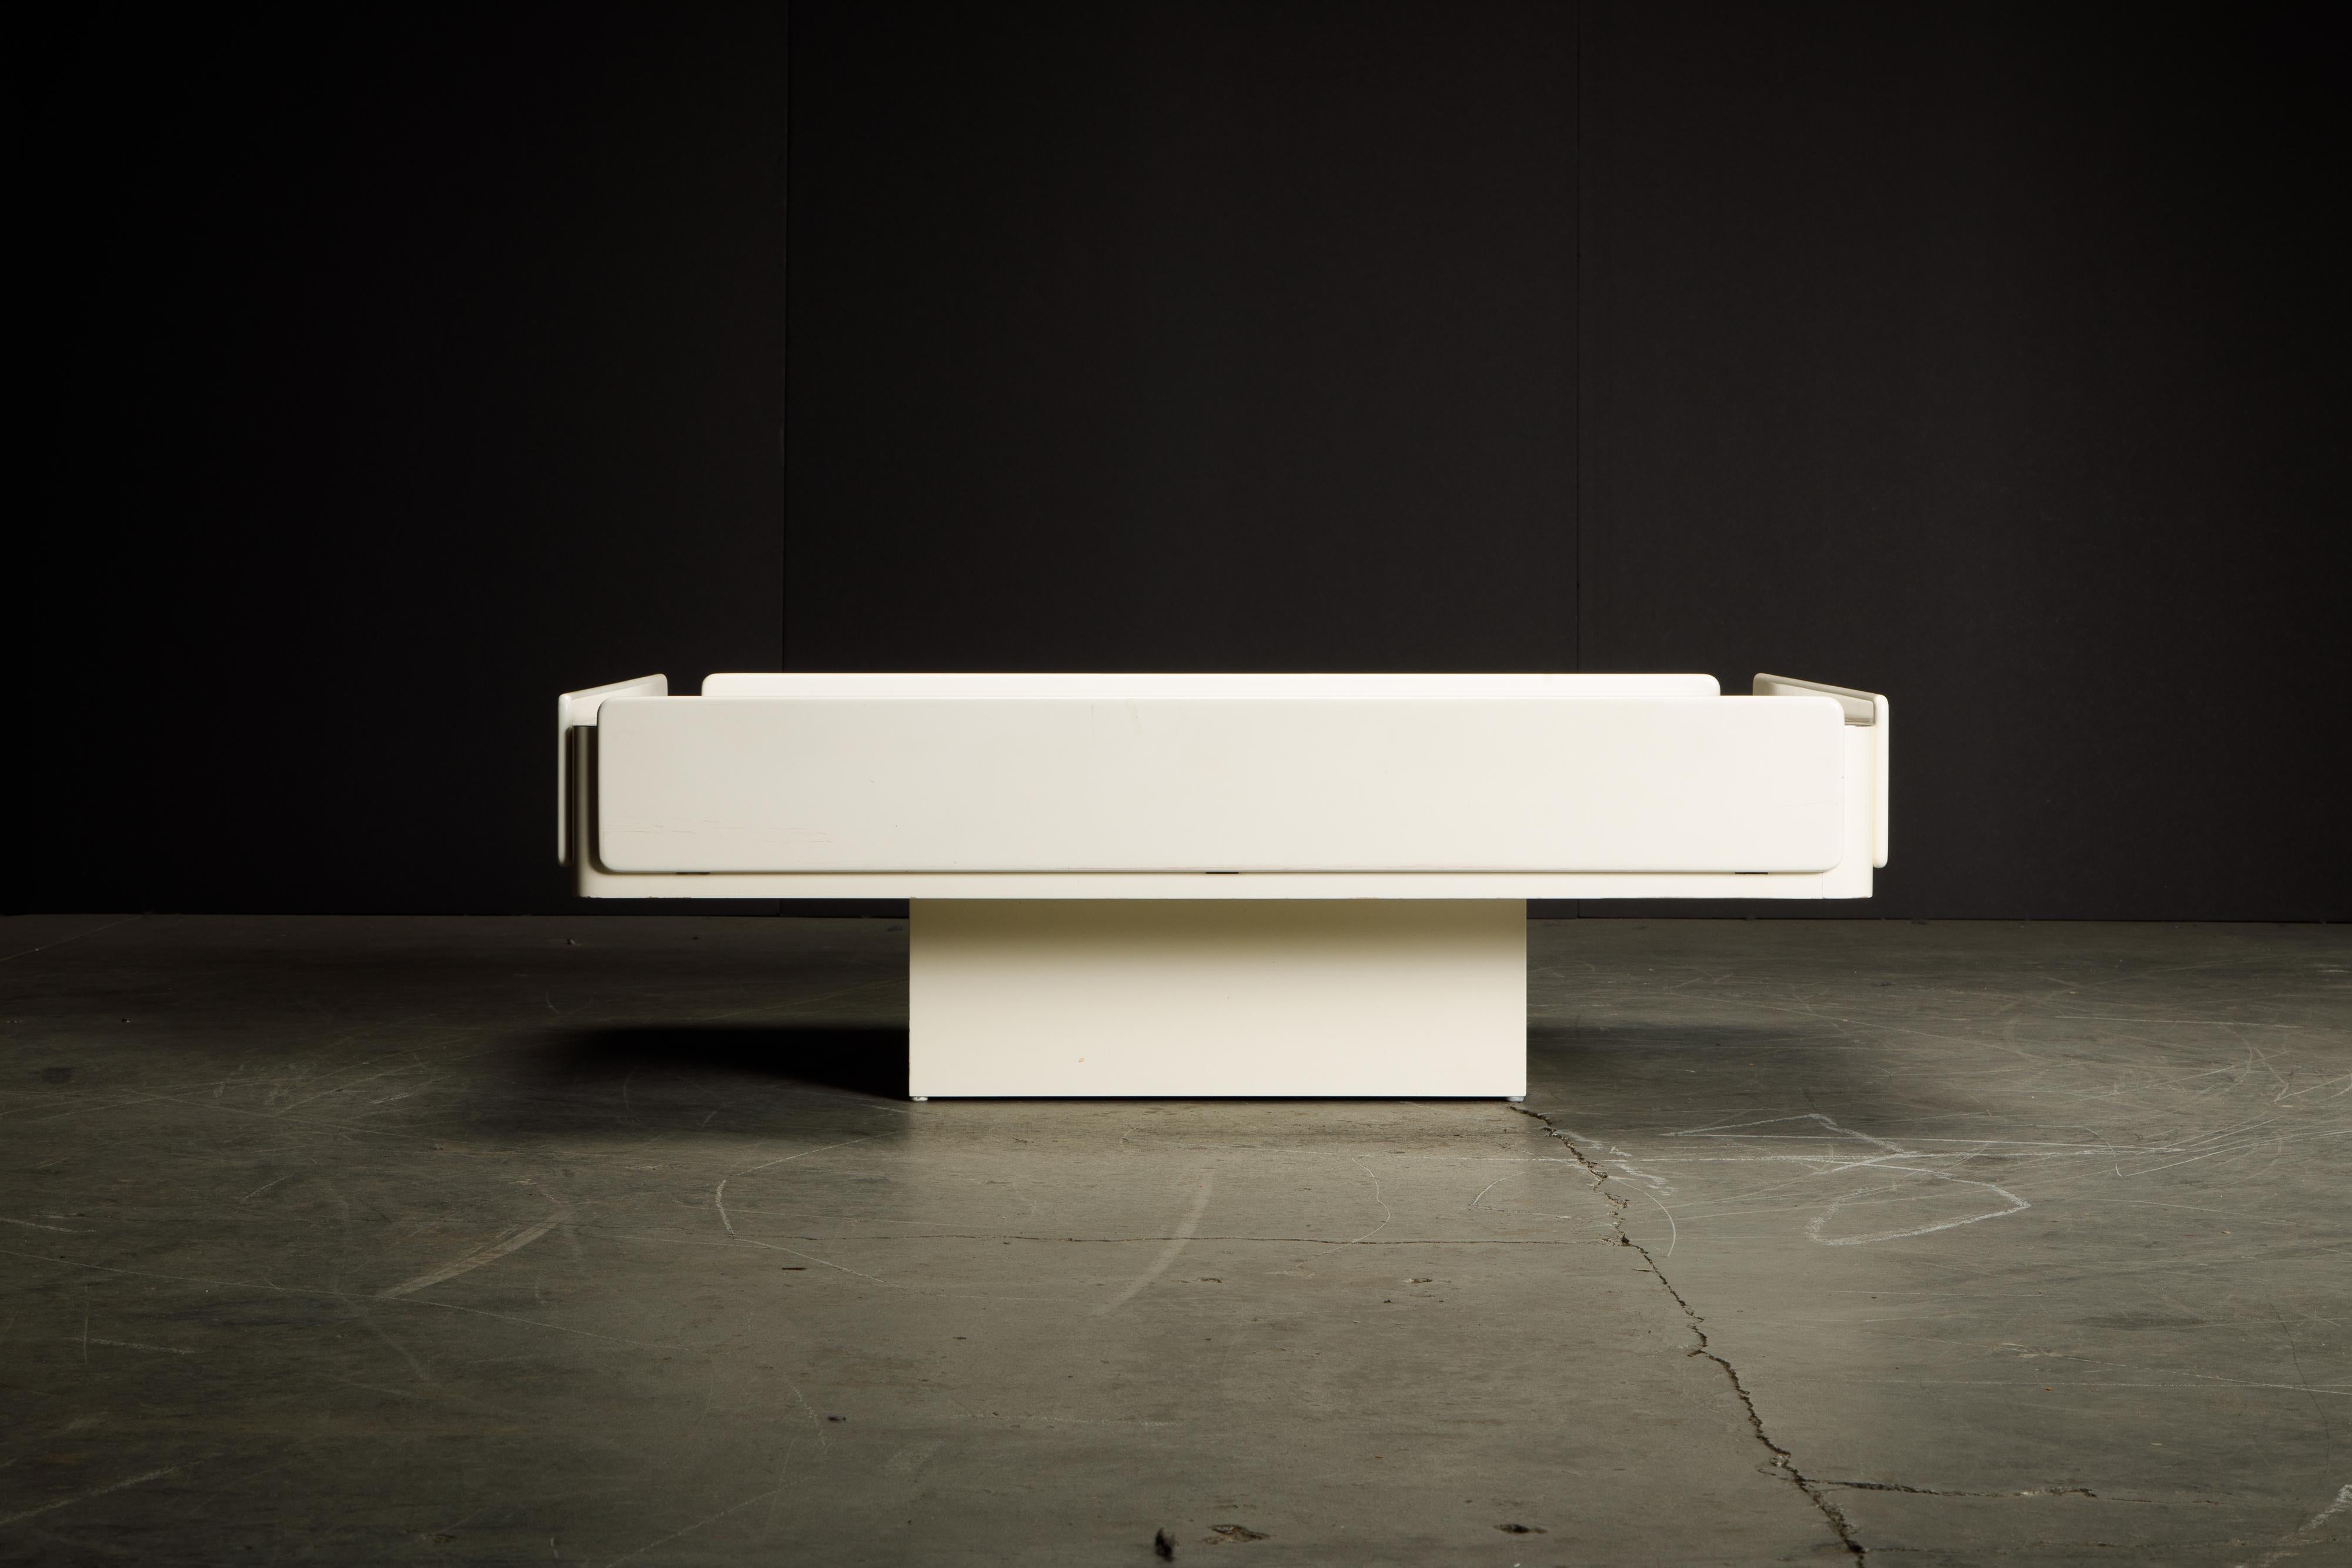 Sleek, cool, functional and elegantly constructed coffee table attributed to the 'Caori' coffee table by Vico Magistretti for Gavina, Italy designed in 1962, in a white lacquered finish with brushed steel top.

This broadly proportioned cocktail